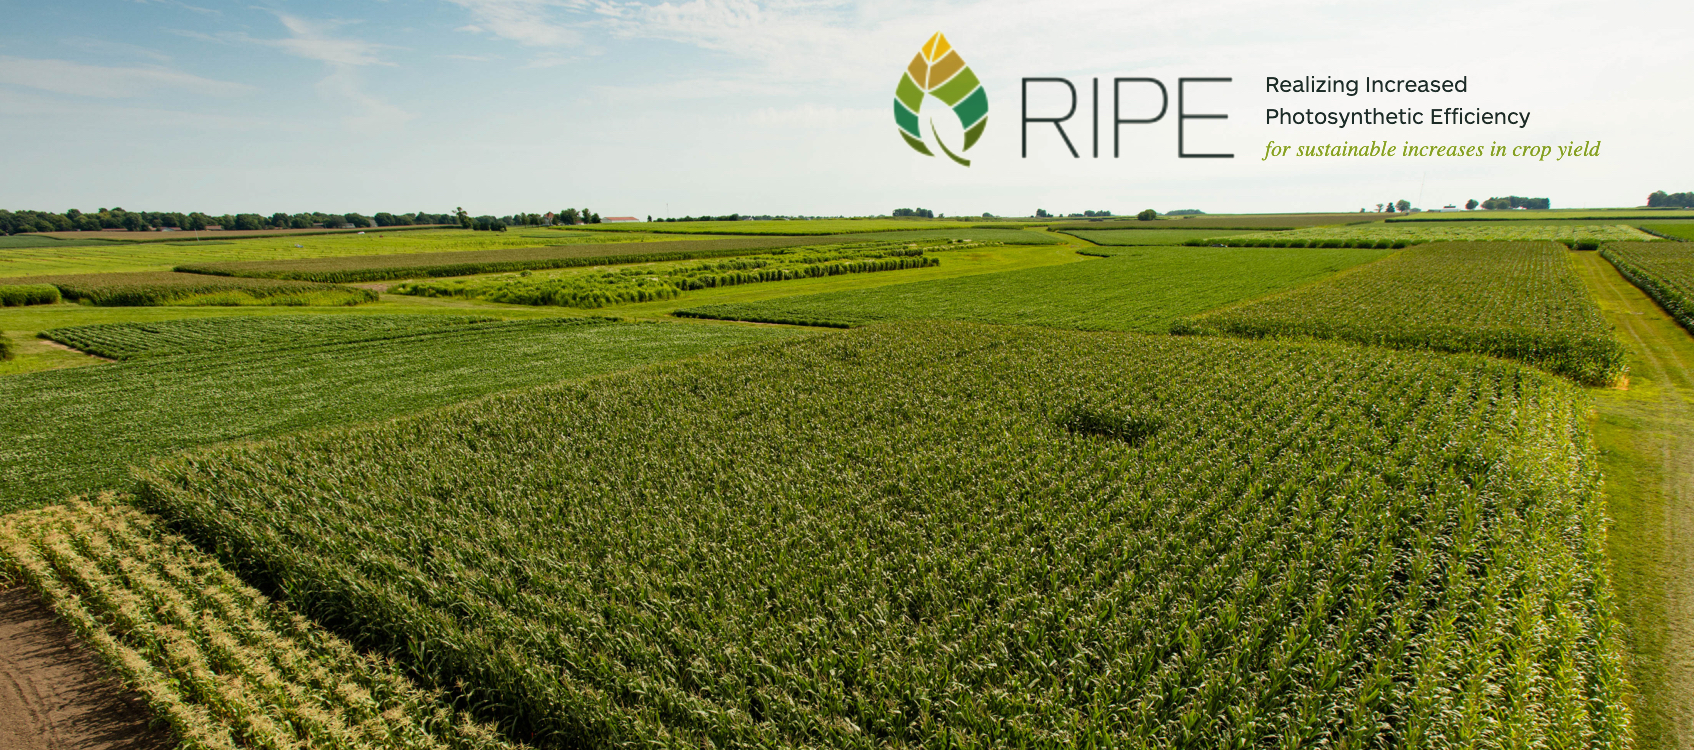 RIPE logo superimposed atop an expansive aerial landscape view of lush maize fields, horizon of blue sky